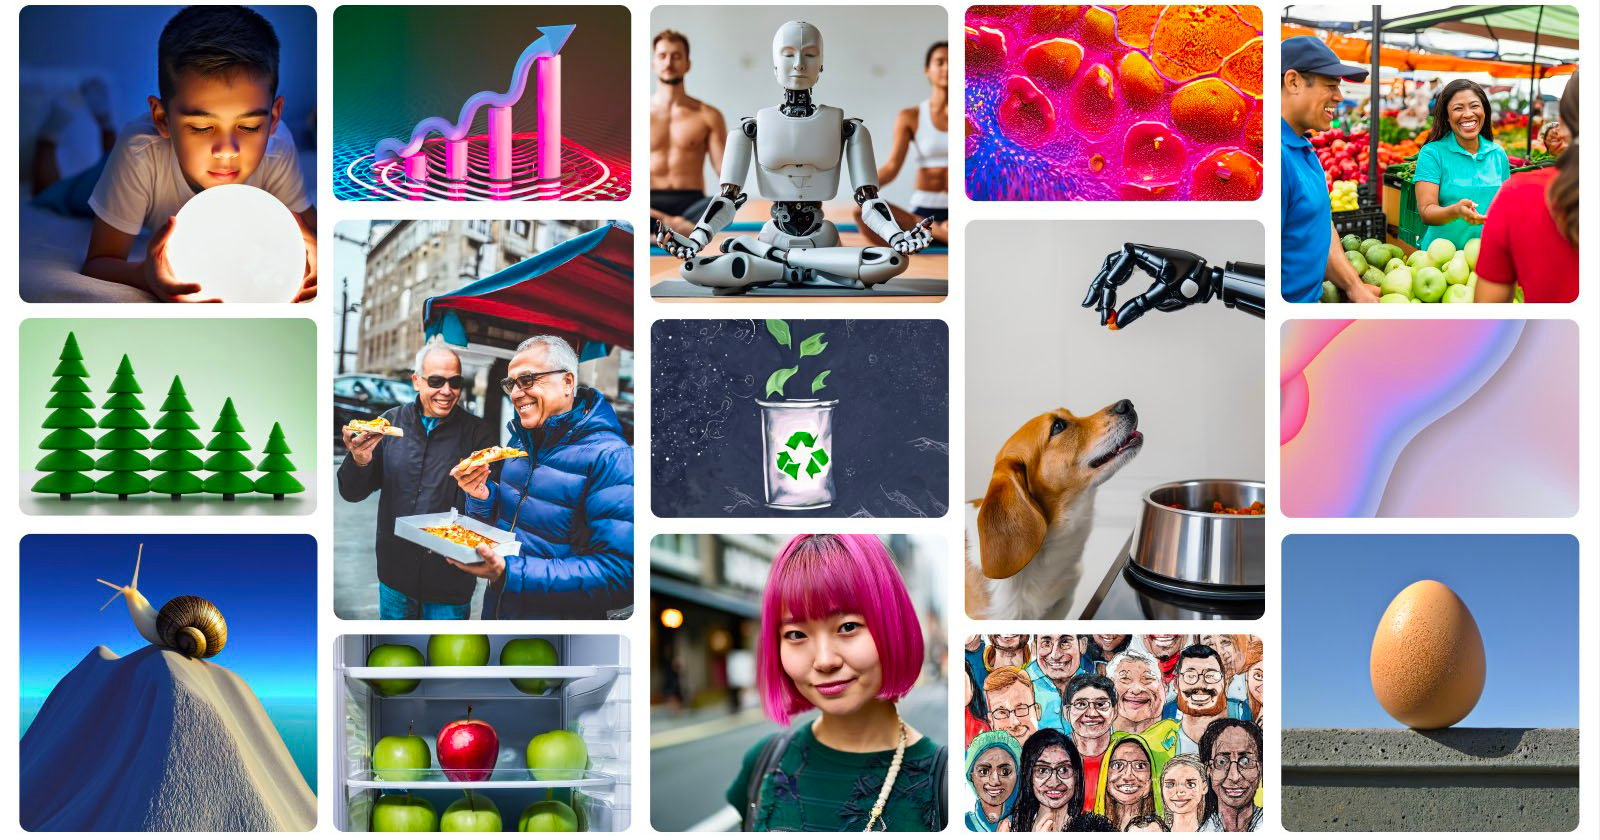  getty launches image generator stock photos 